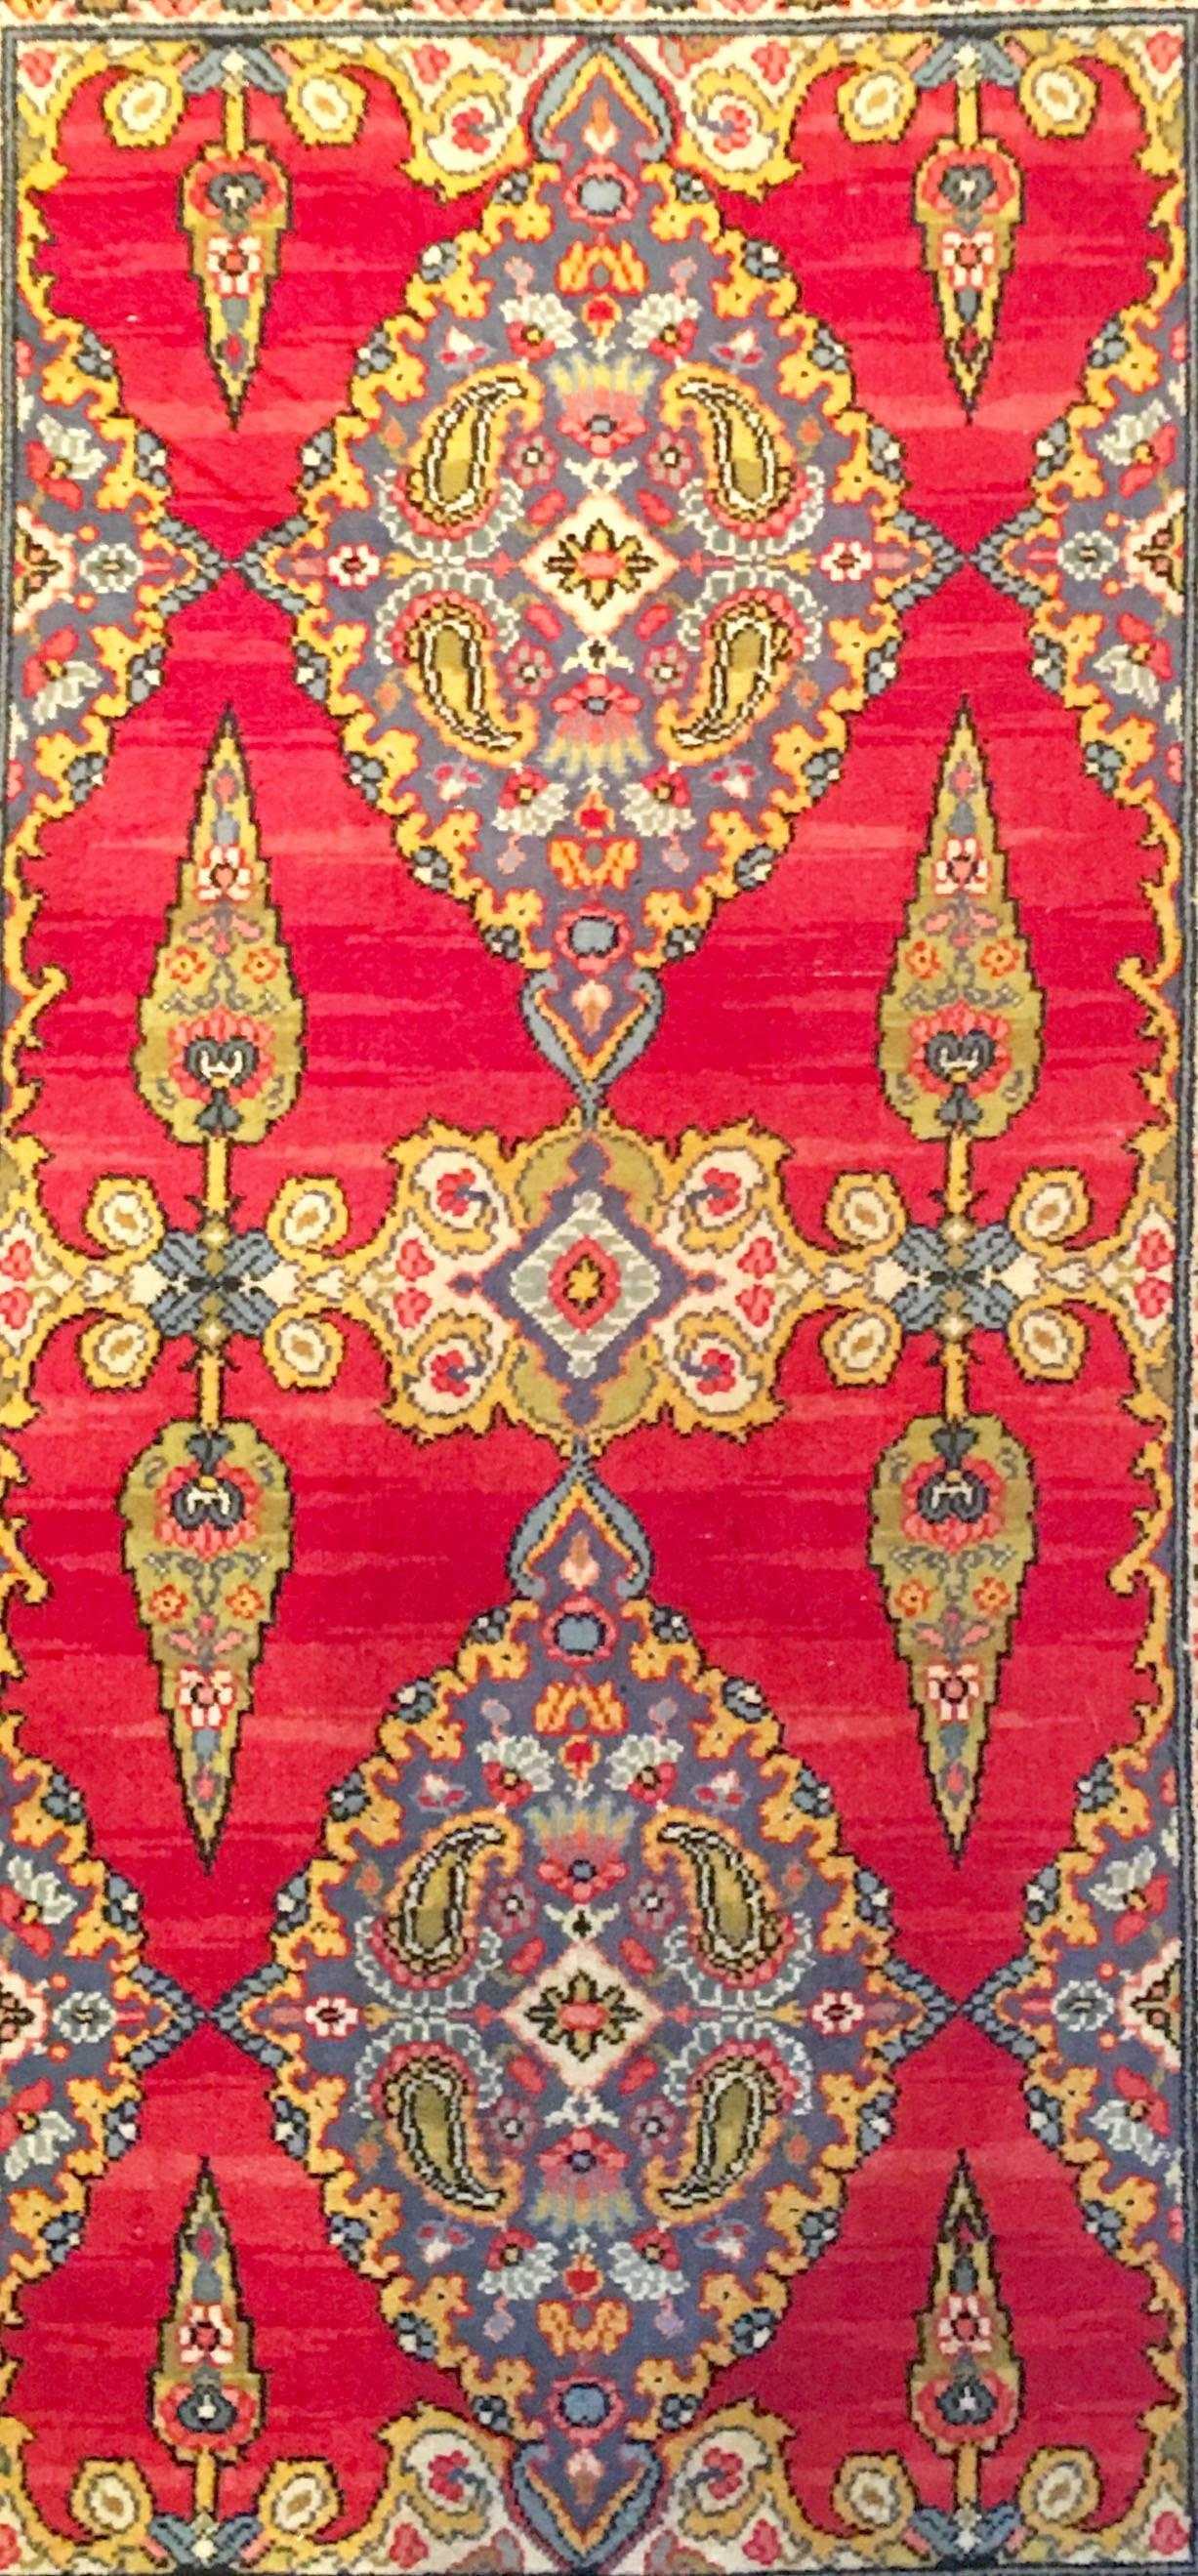 Hand-Woven Early 20th Century Silk & Wool Paisley Blossom Rug For Sale